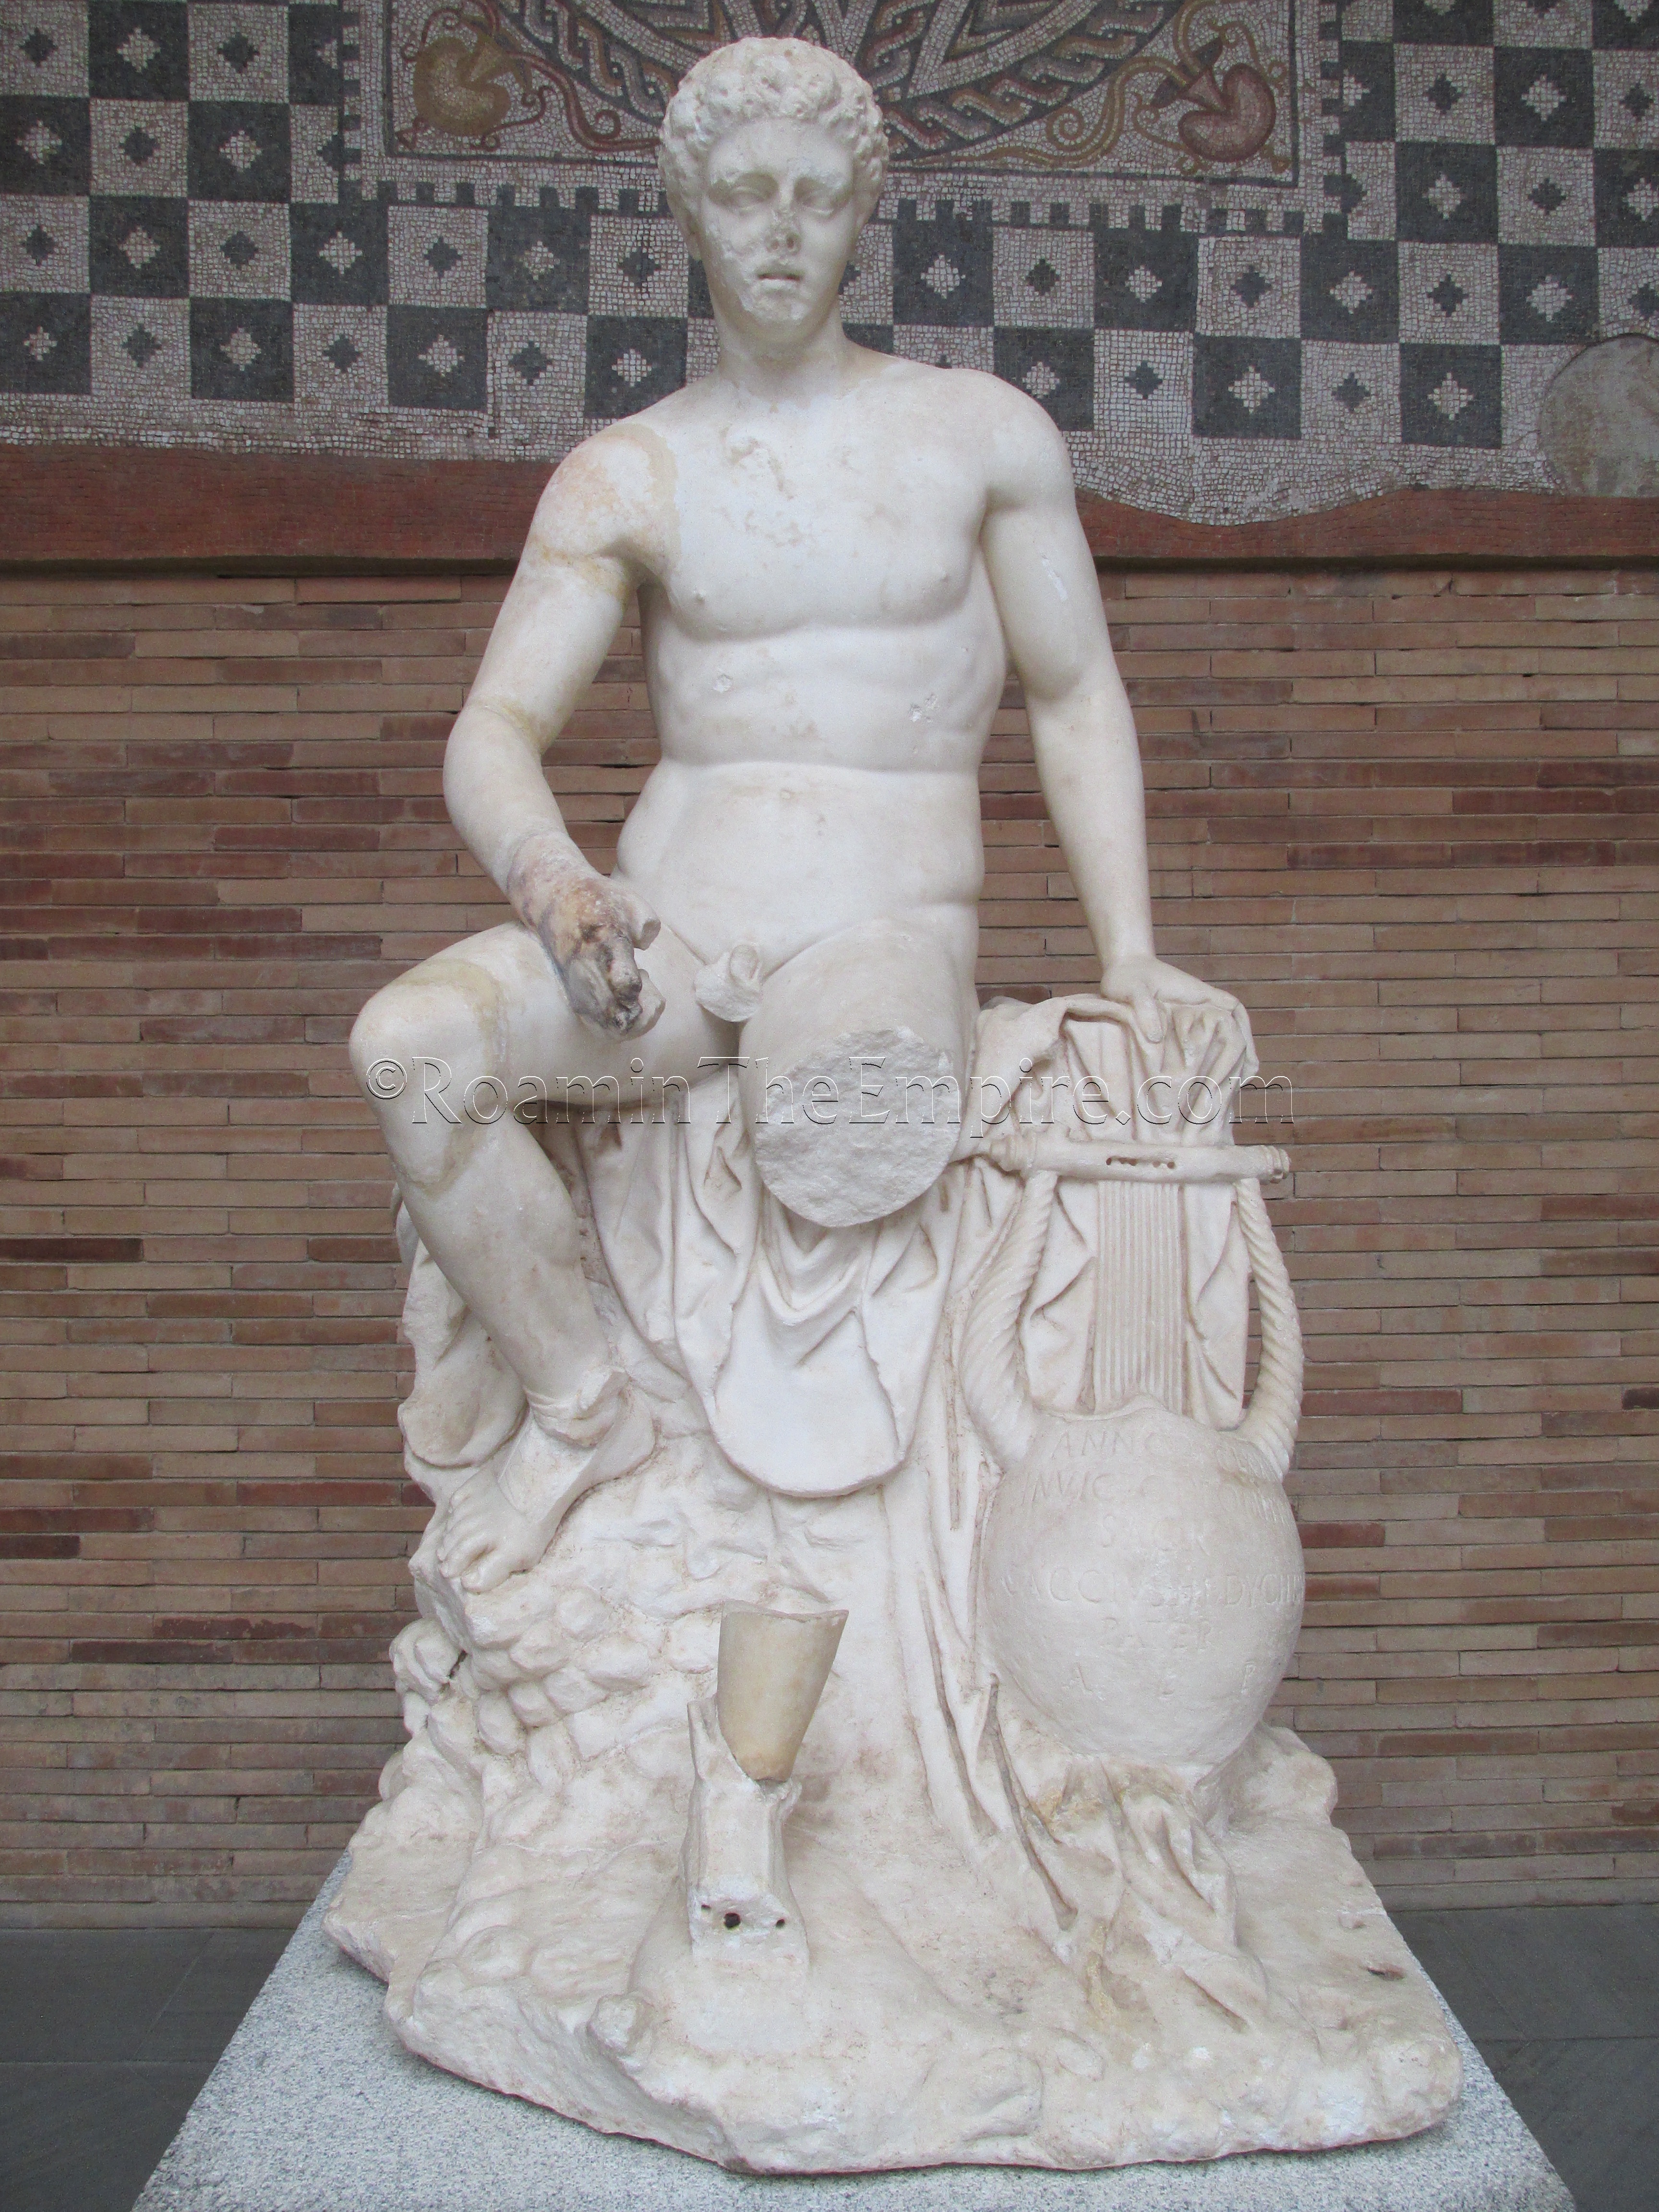 Statue of a seated Mercury with inscribed lyre (see gallery) from the mithraeum. Second century CE.